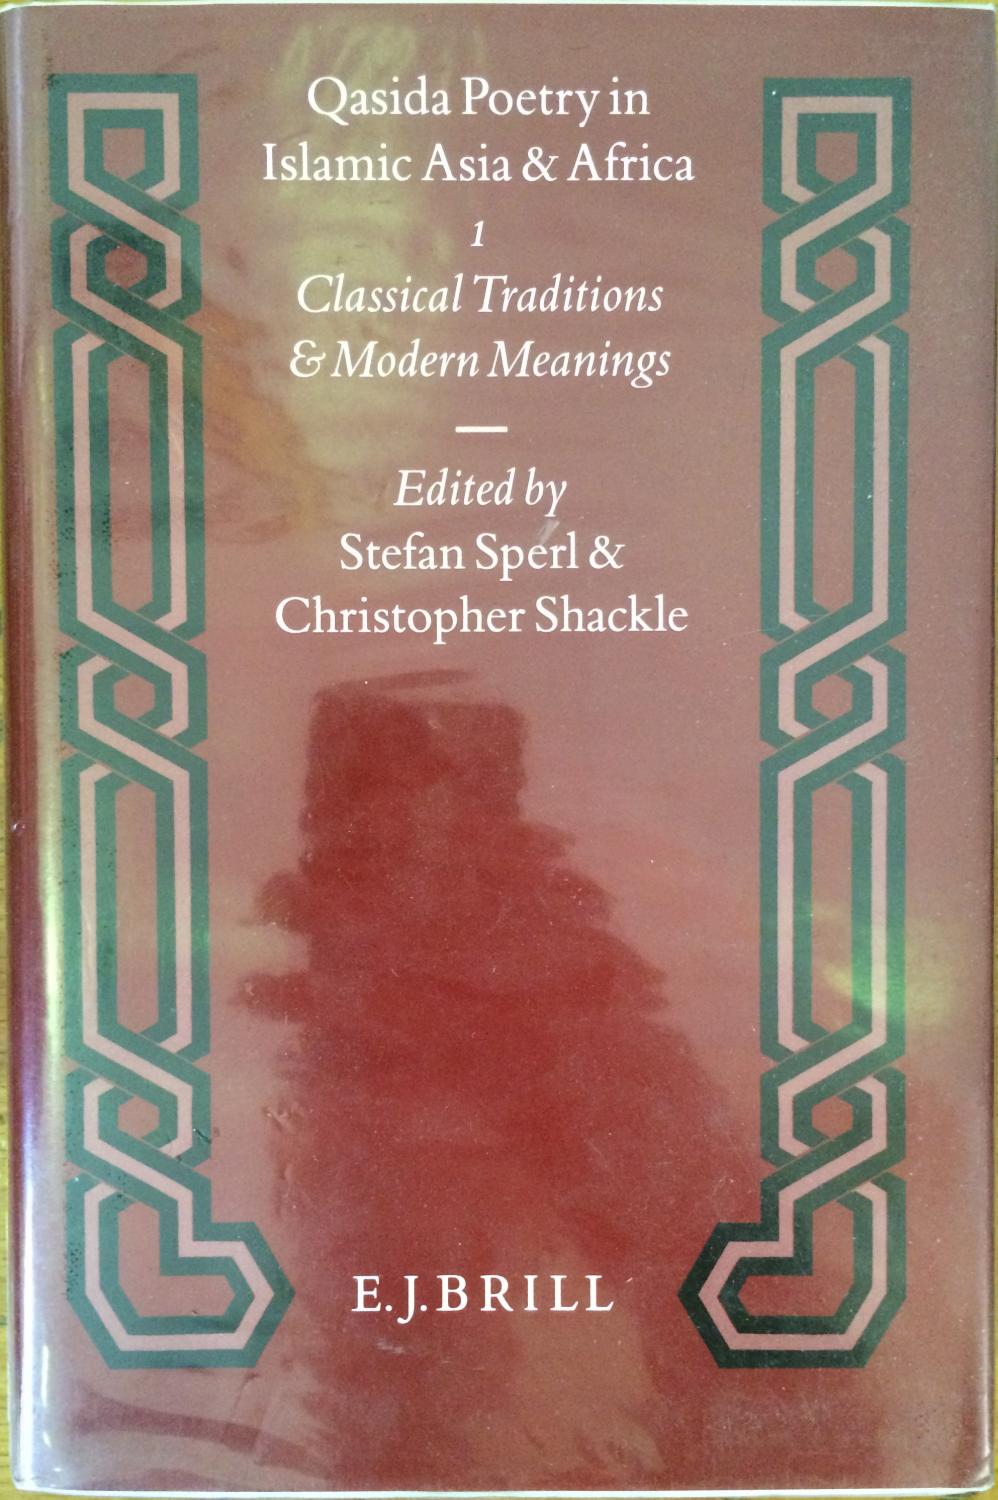 Qasida Poetry in Islamic Asia and Africa. Volume 1. Classical Tradition and Modern Meanings - edited by Stefan Sperl and Christopher Shackle ; consultant to the editors, Nicholas Awde.